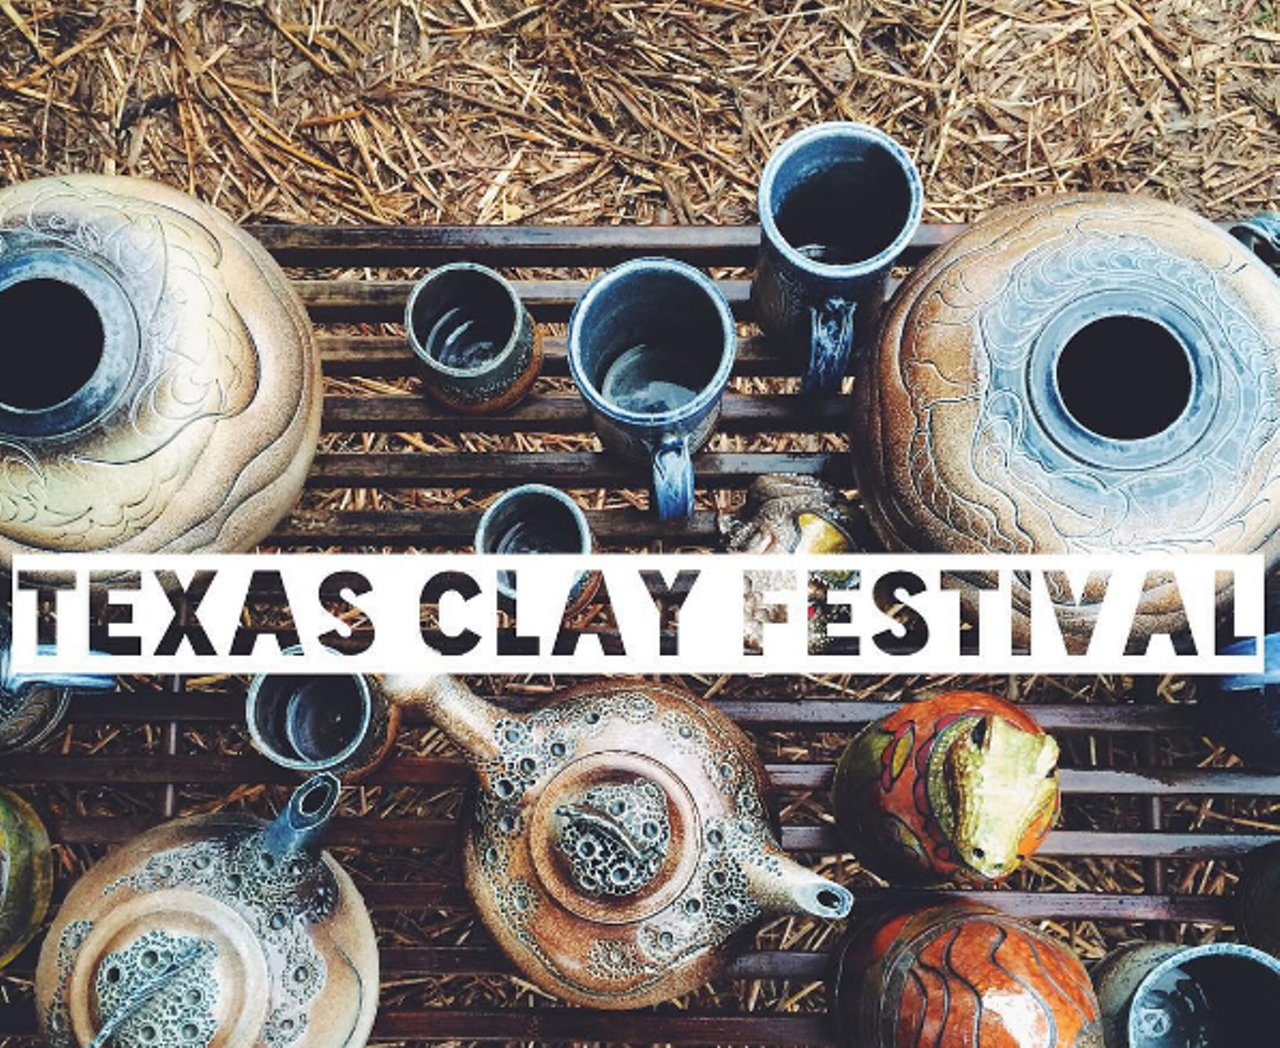  Texas Clay Festival
10 a.m. - 6 p.m. Sat. Oct. 22, 10 a.m.-5 p.m. Sun. Oct. 23, held in the Gruene Historical District of New Braunfels
Featuring the work of over 60 Texas potters and clay artists, the Texas Clay Festival promises a work of art for every taste.
Photo via Instagram, clairesommersbuck